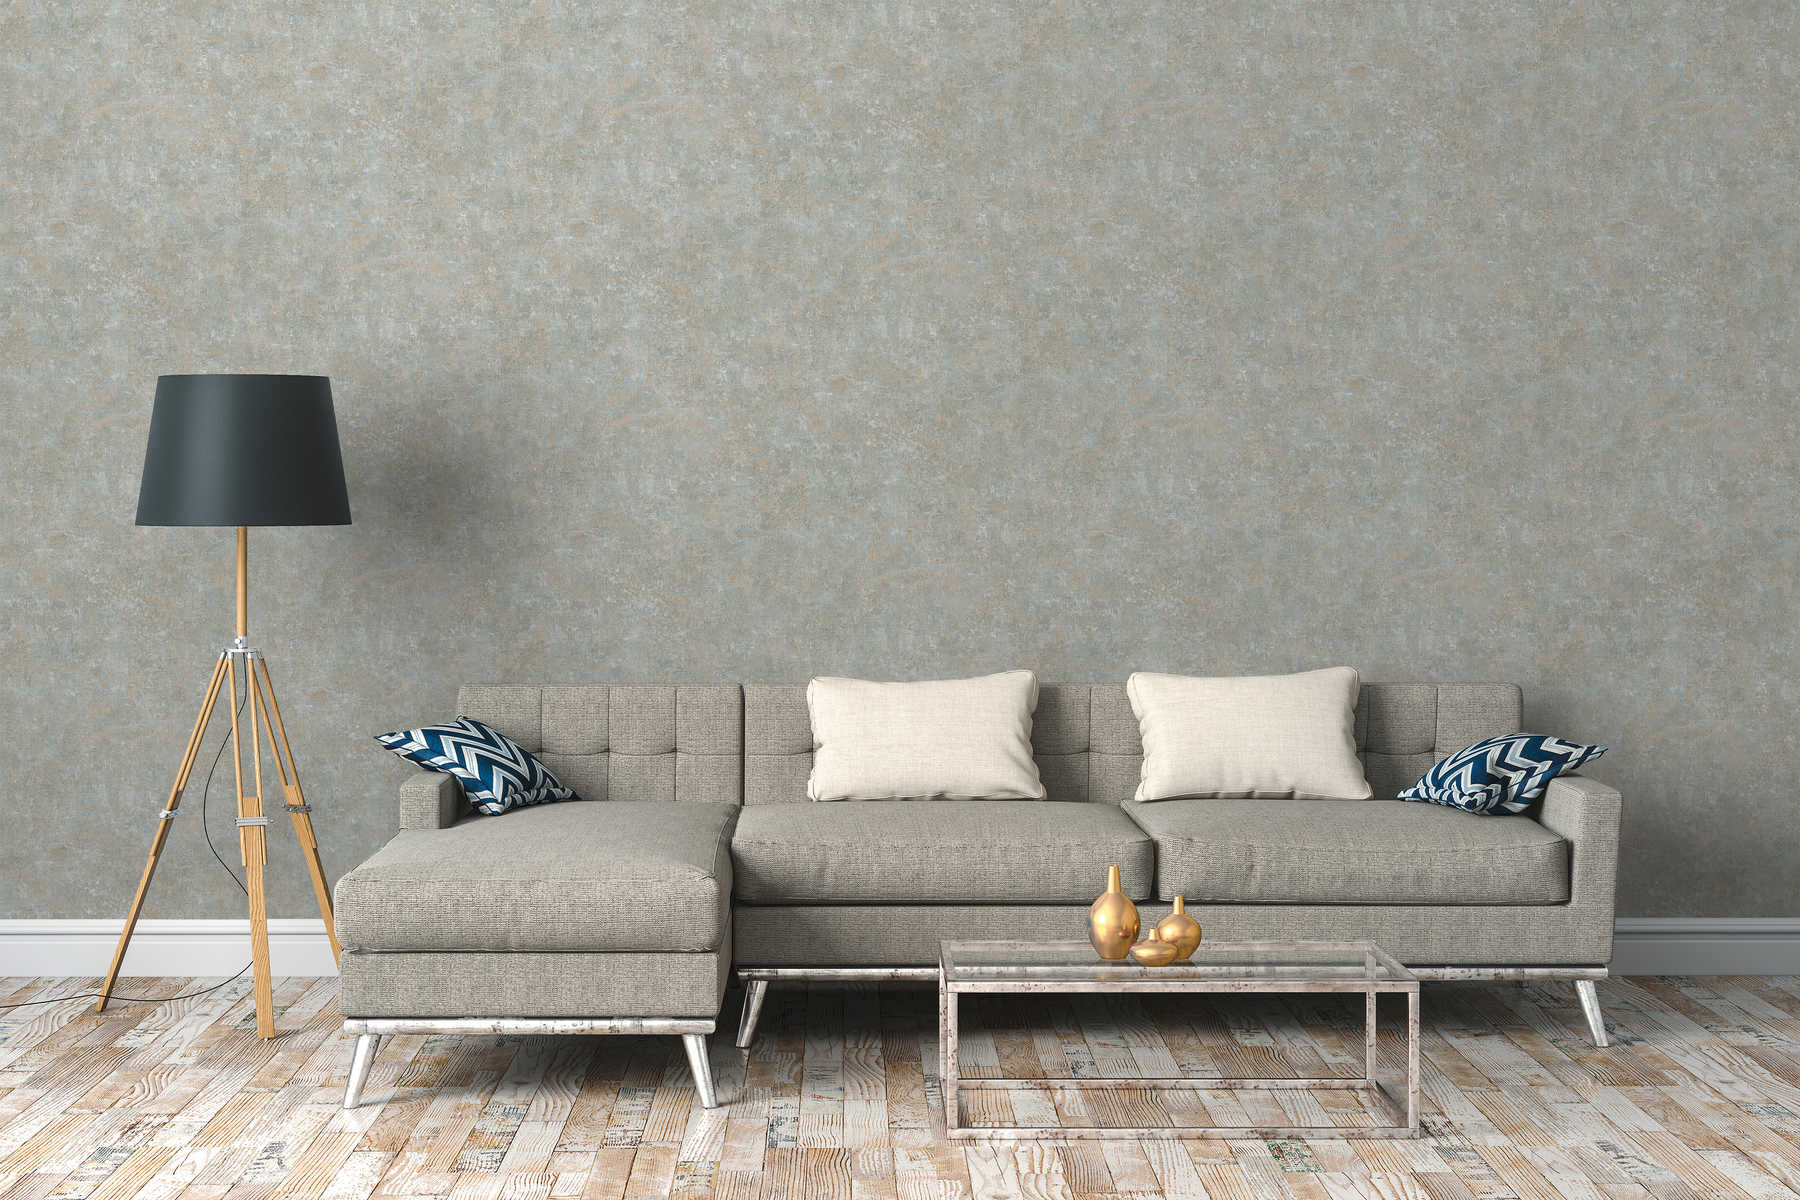             Wallpaper subtle colour pattern in used look - blue, grey
        